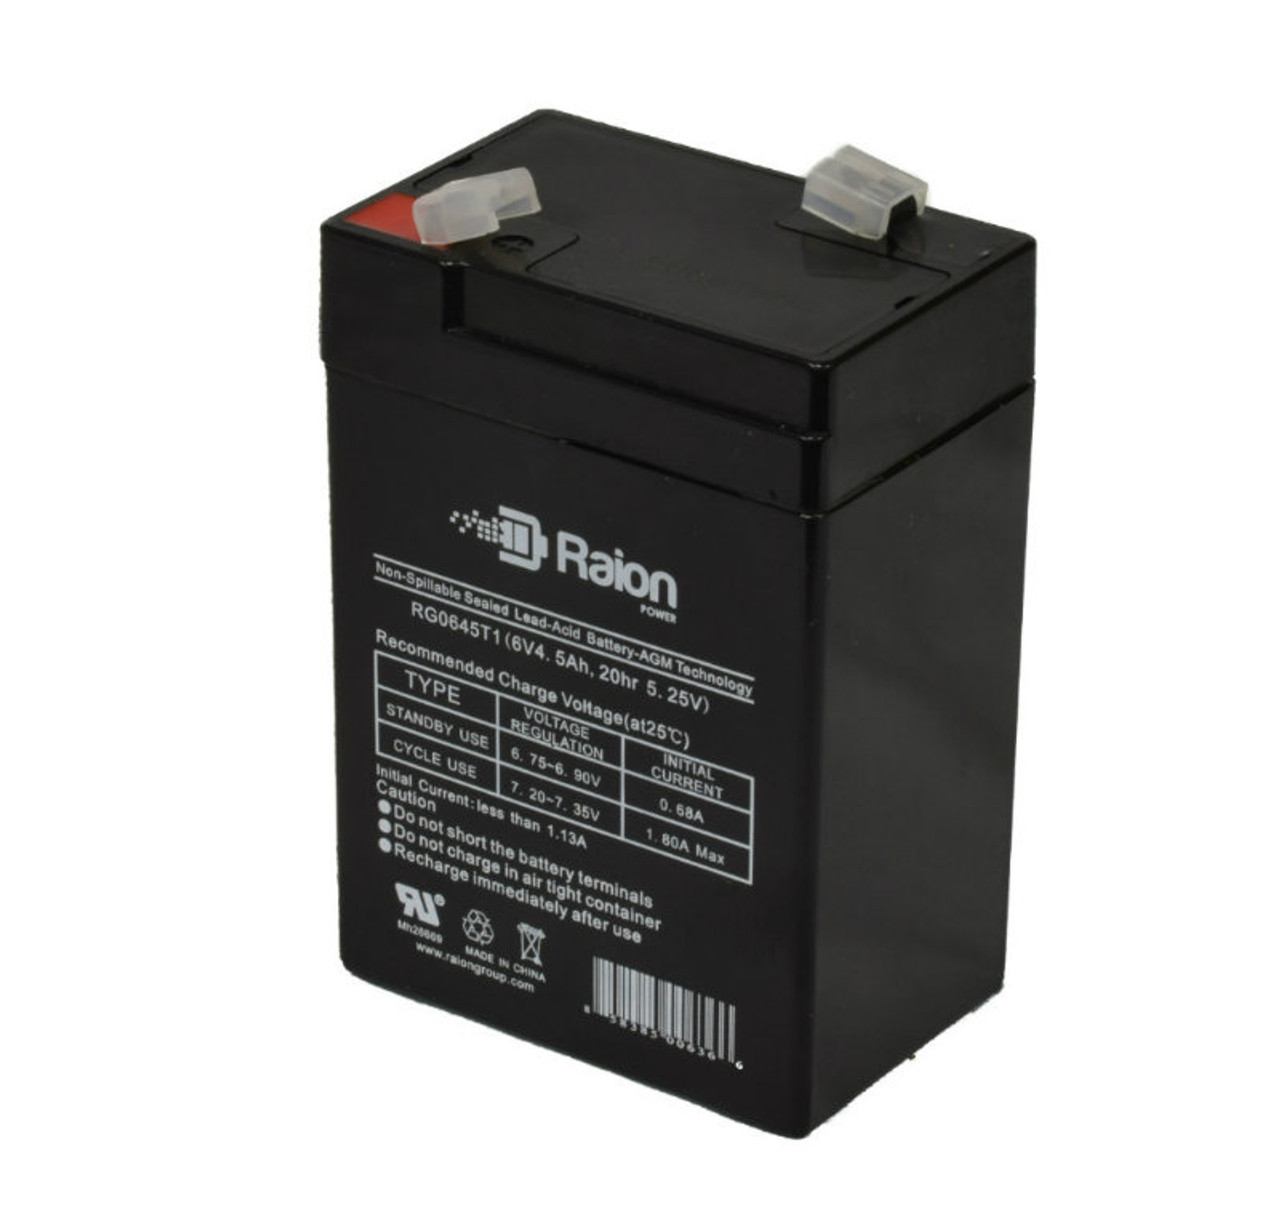 Raion Power RG0645T1 6V 4.5Ah Replacement Battery Cartridge for American Hospital Supply 521 Plus